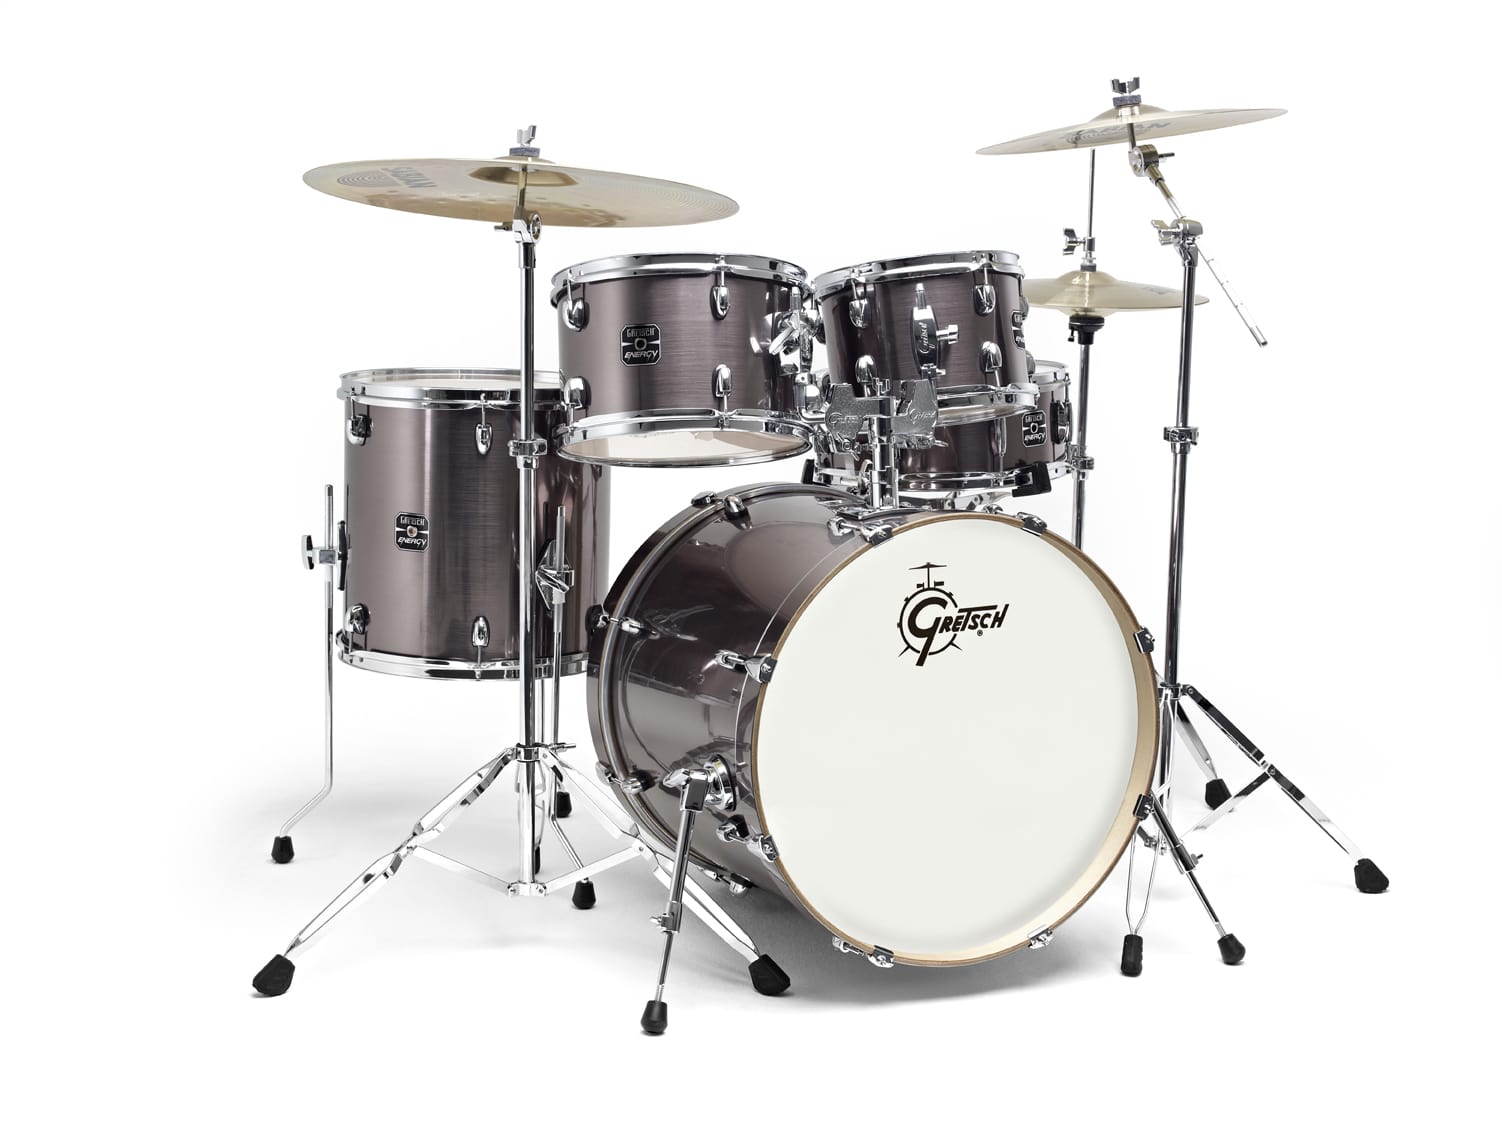 GRETSCH DRUMS NEW ENERGY FUSION 20 GREY STELL + CYMBALES PAISTE 101